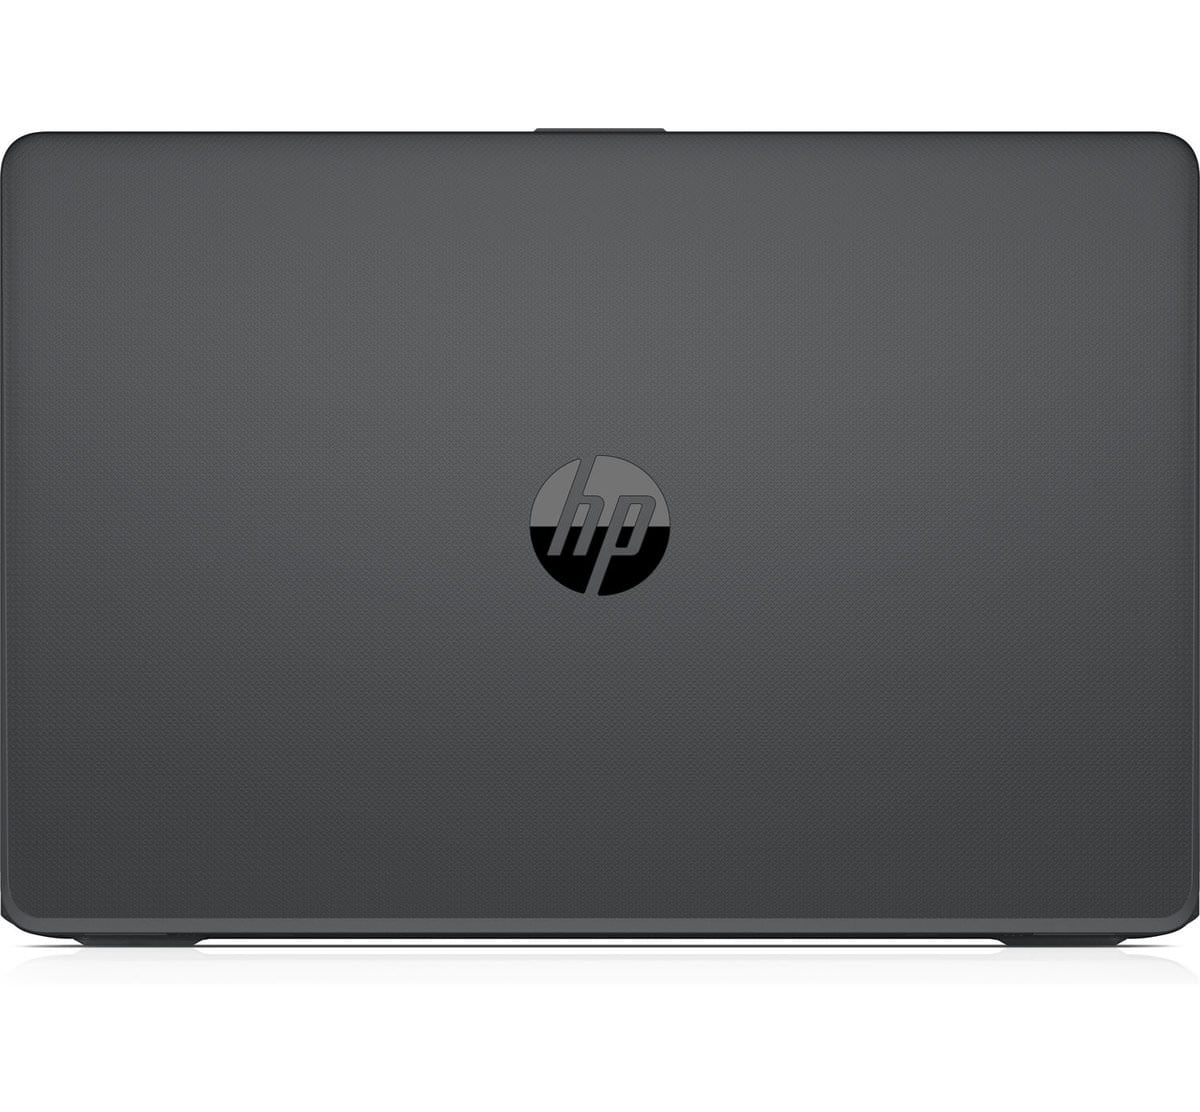 Original New for HP Probook  BS  BW  G6  G6 Upper Palmrest Case  with Non Backlit Keyboard & Touchpad